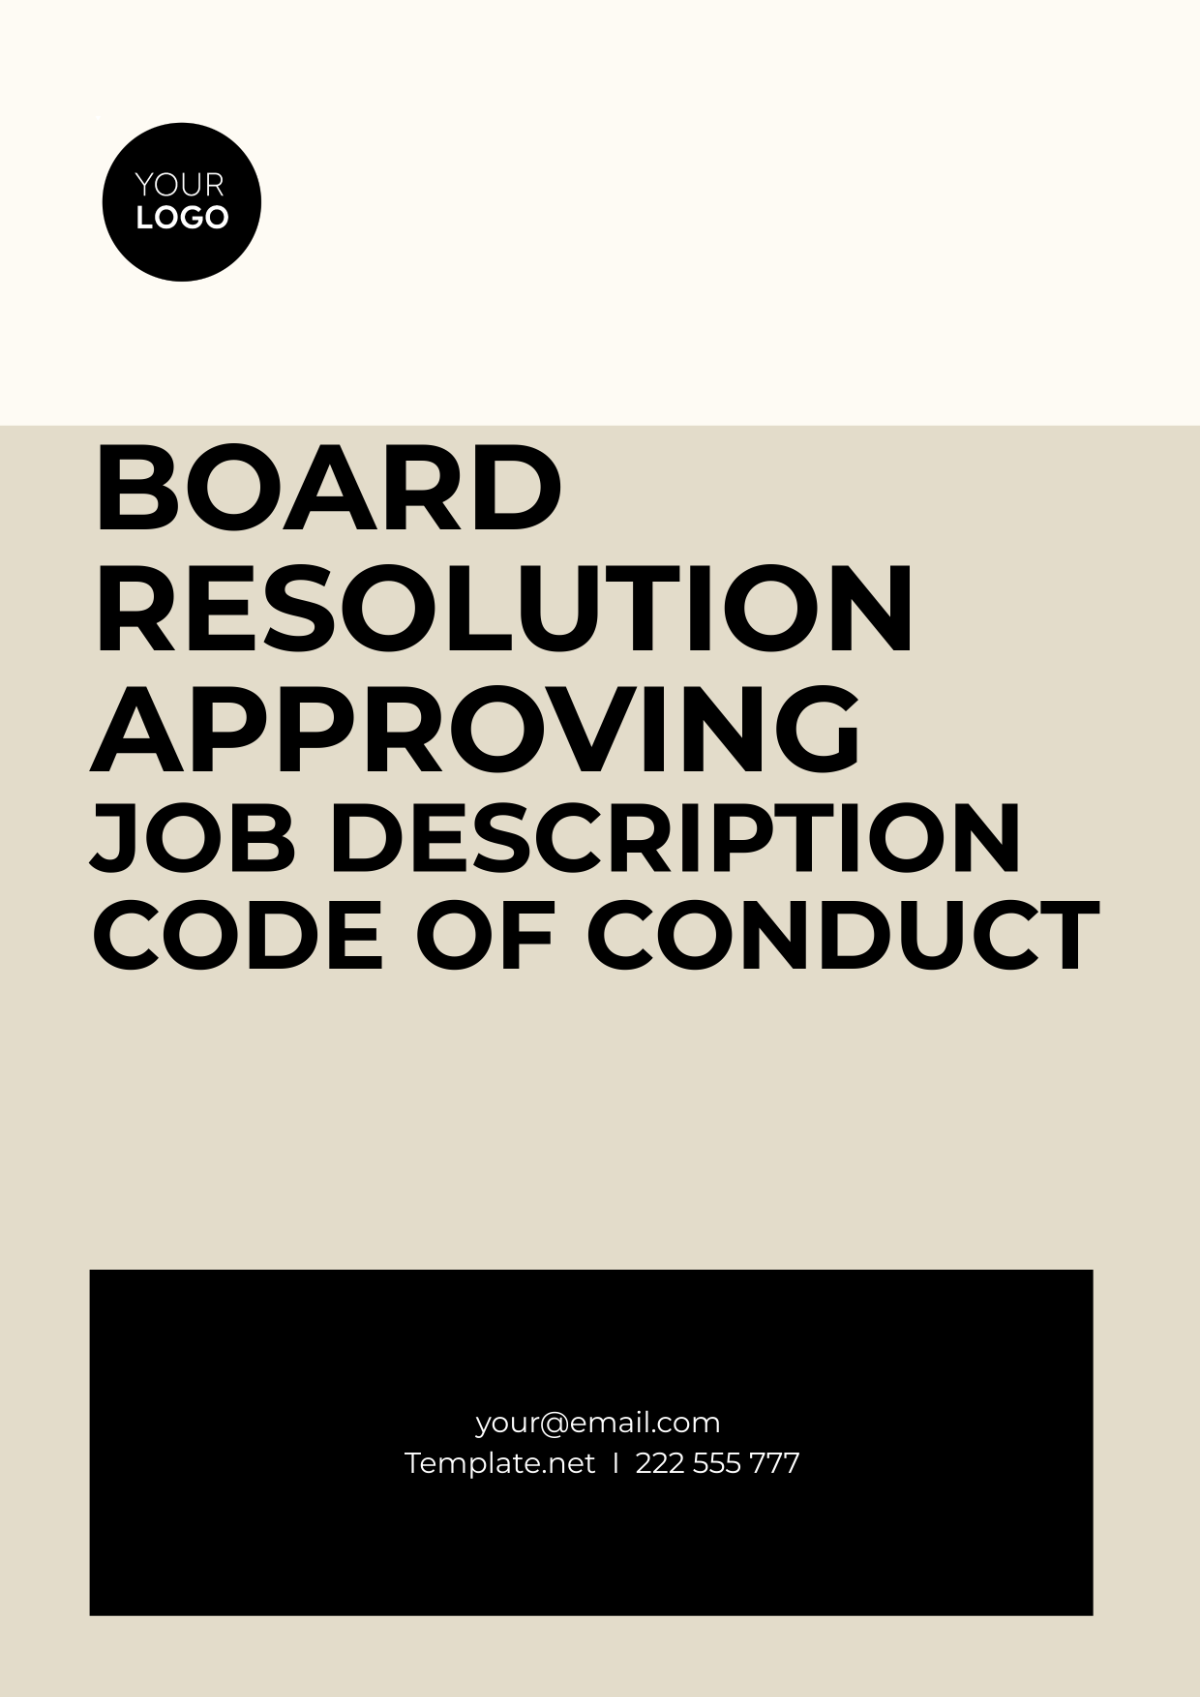 Board Resolution Approving Job Description Code Of Conduct Template